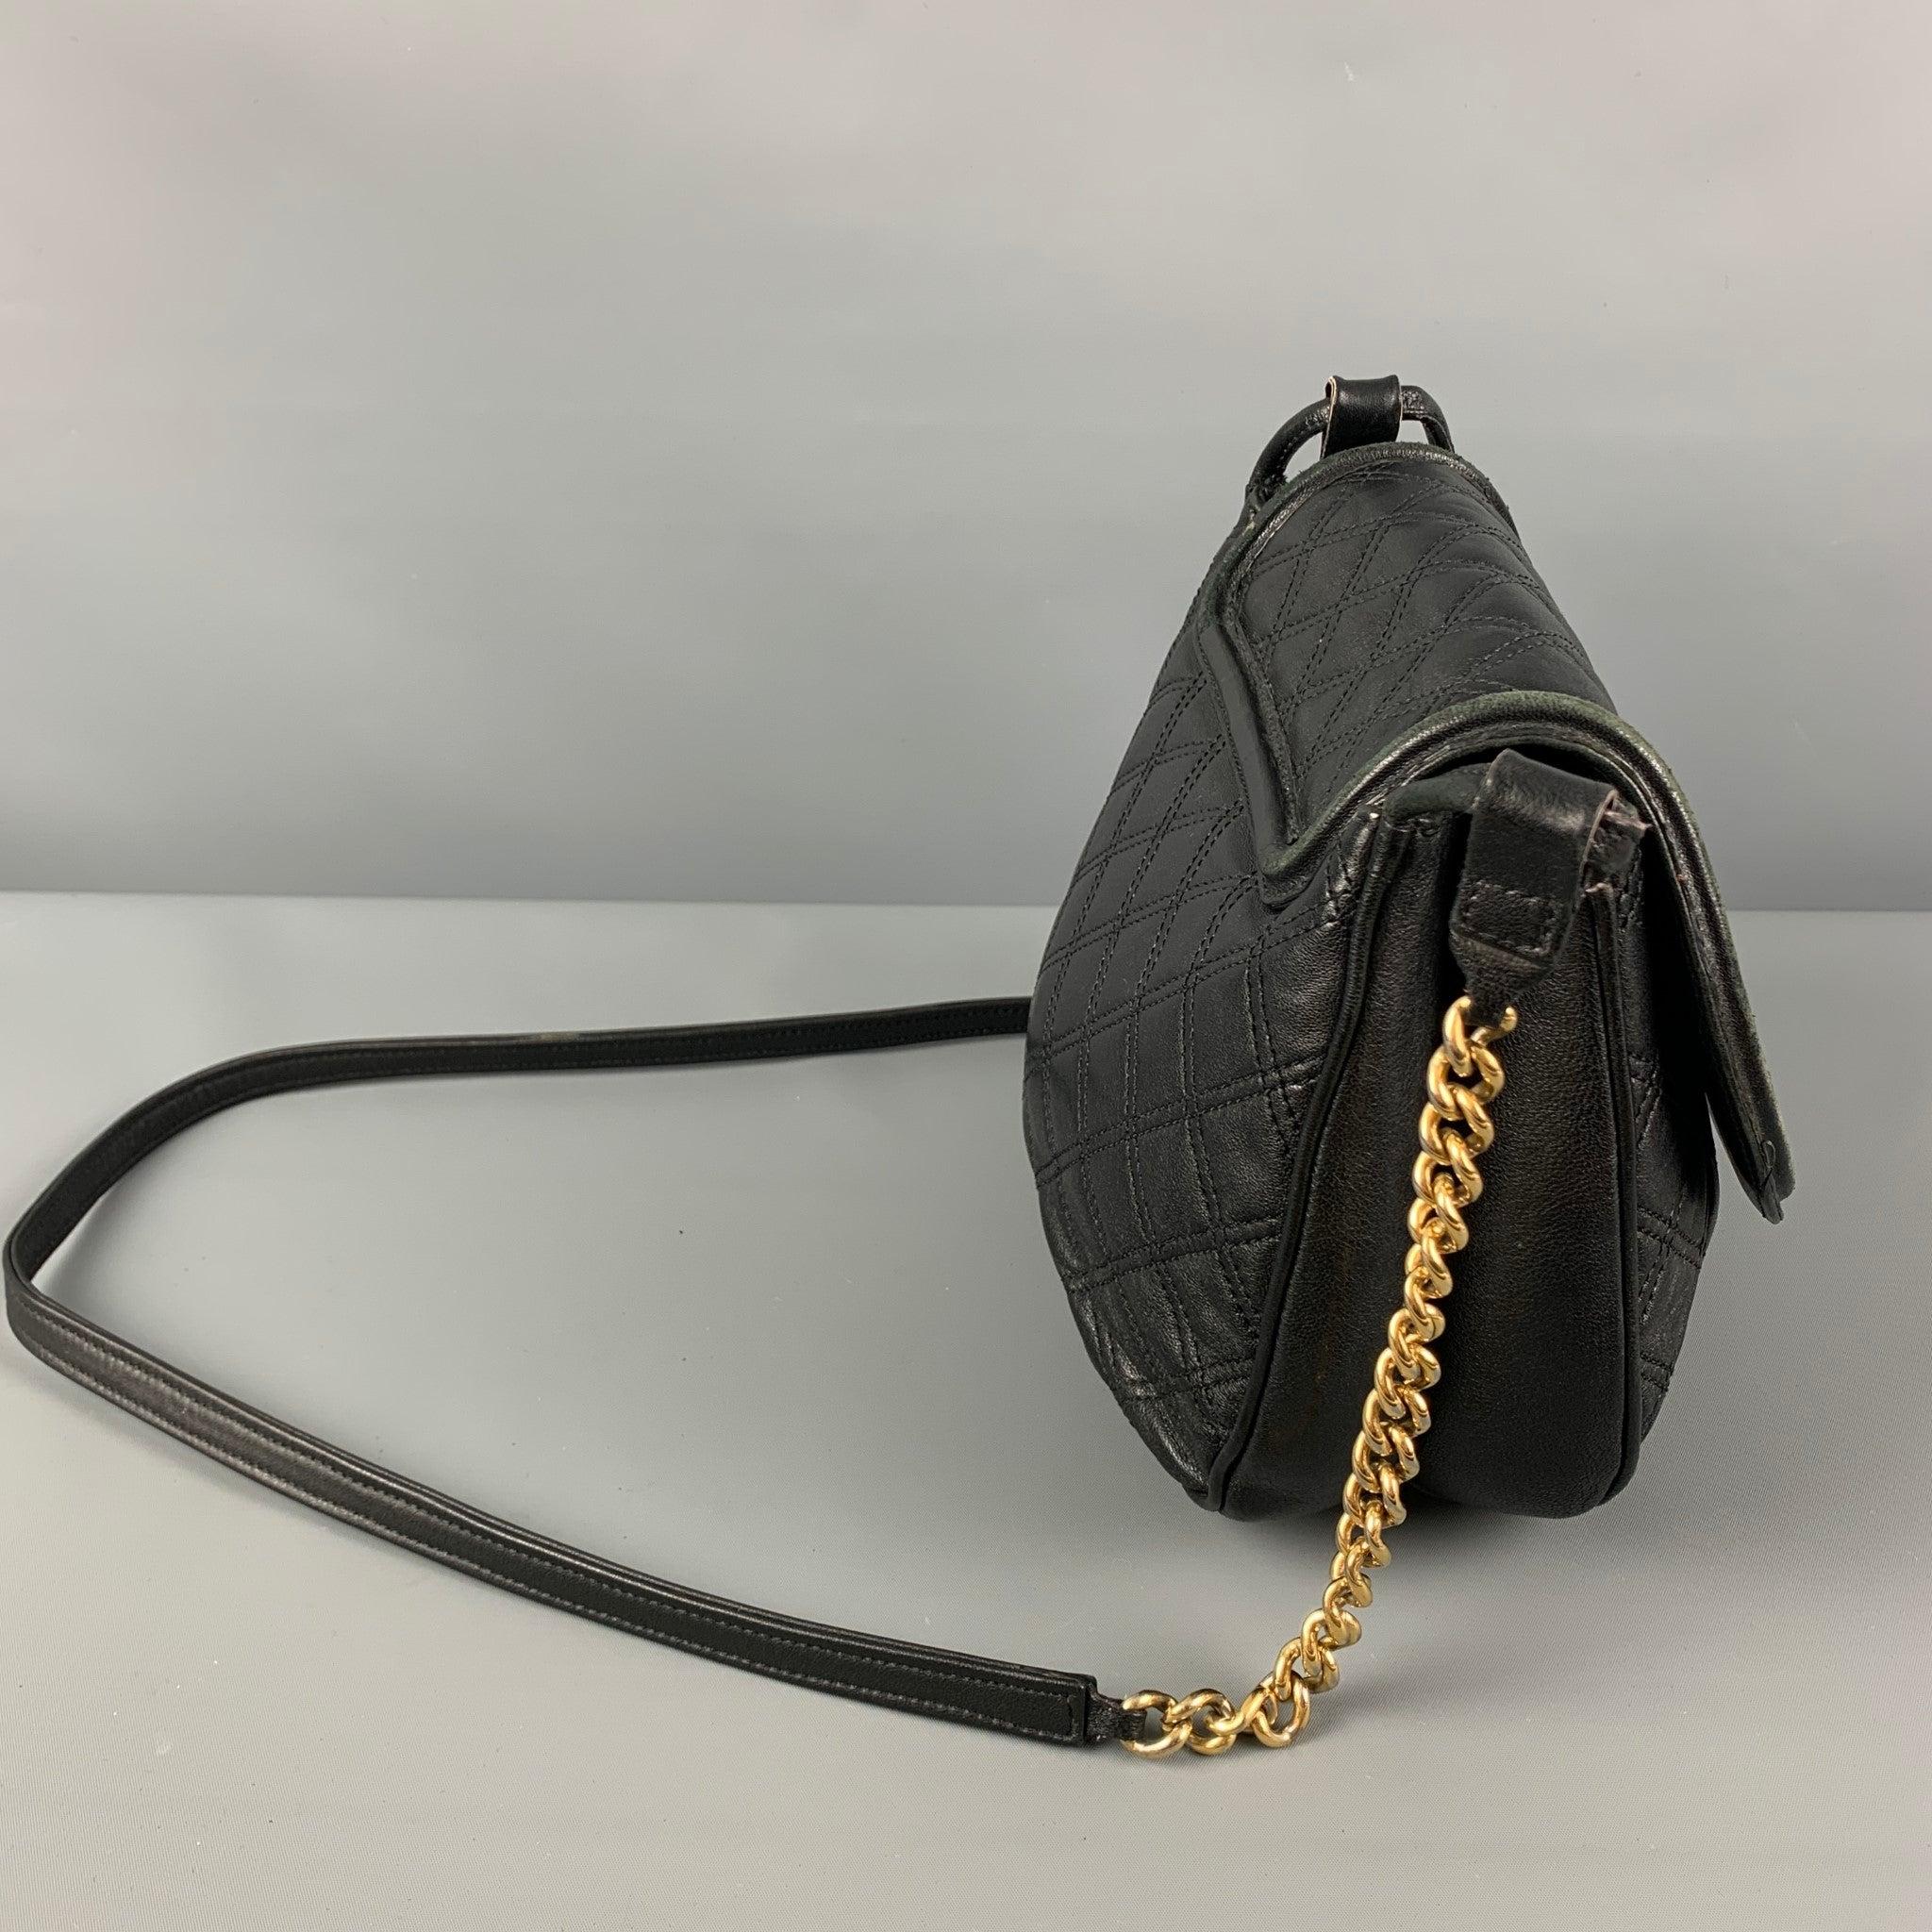 MARC JACOBS handbag comes in a black quilted leather featuring a crossbody strap, gold tone chain link trim, dual inner compartment, and a snap button closure. Made in Italy.Good Pre-Owned Condition. Light wear. As-Is.  

Measurements: 
  Length: 10